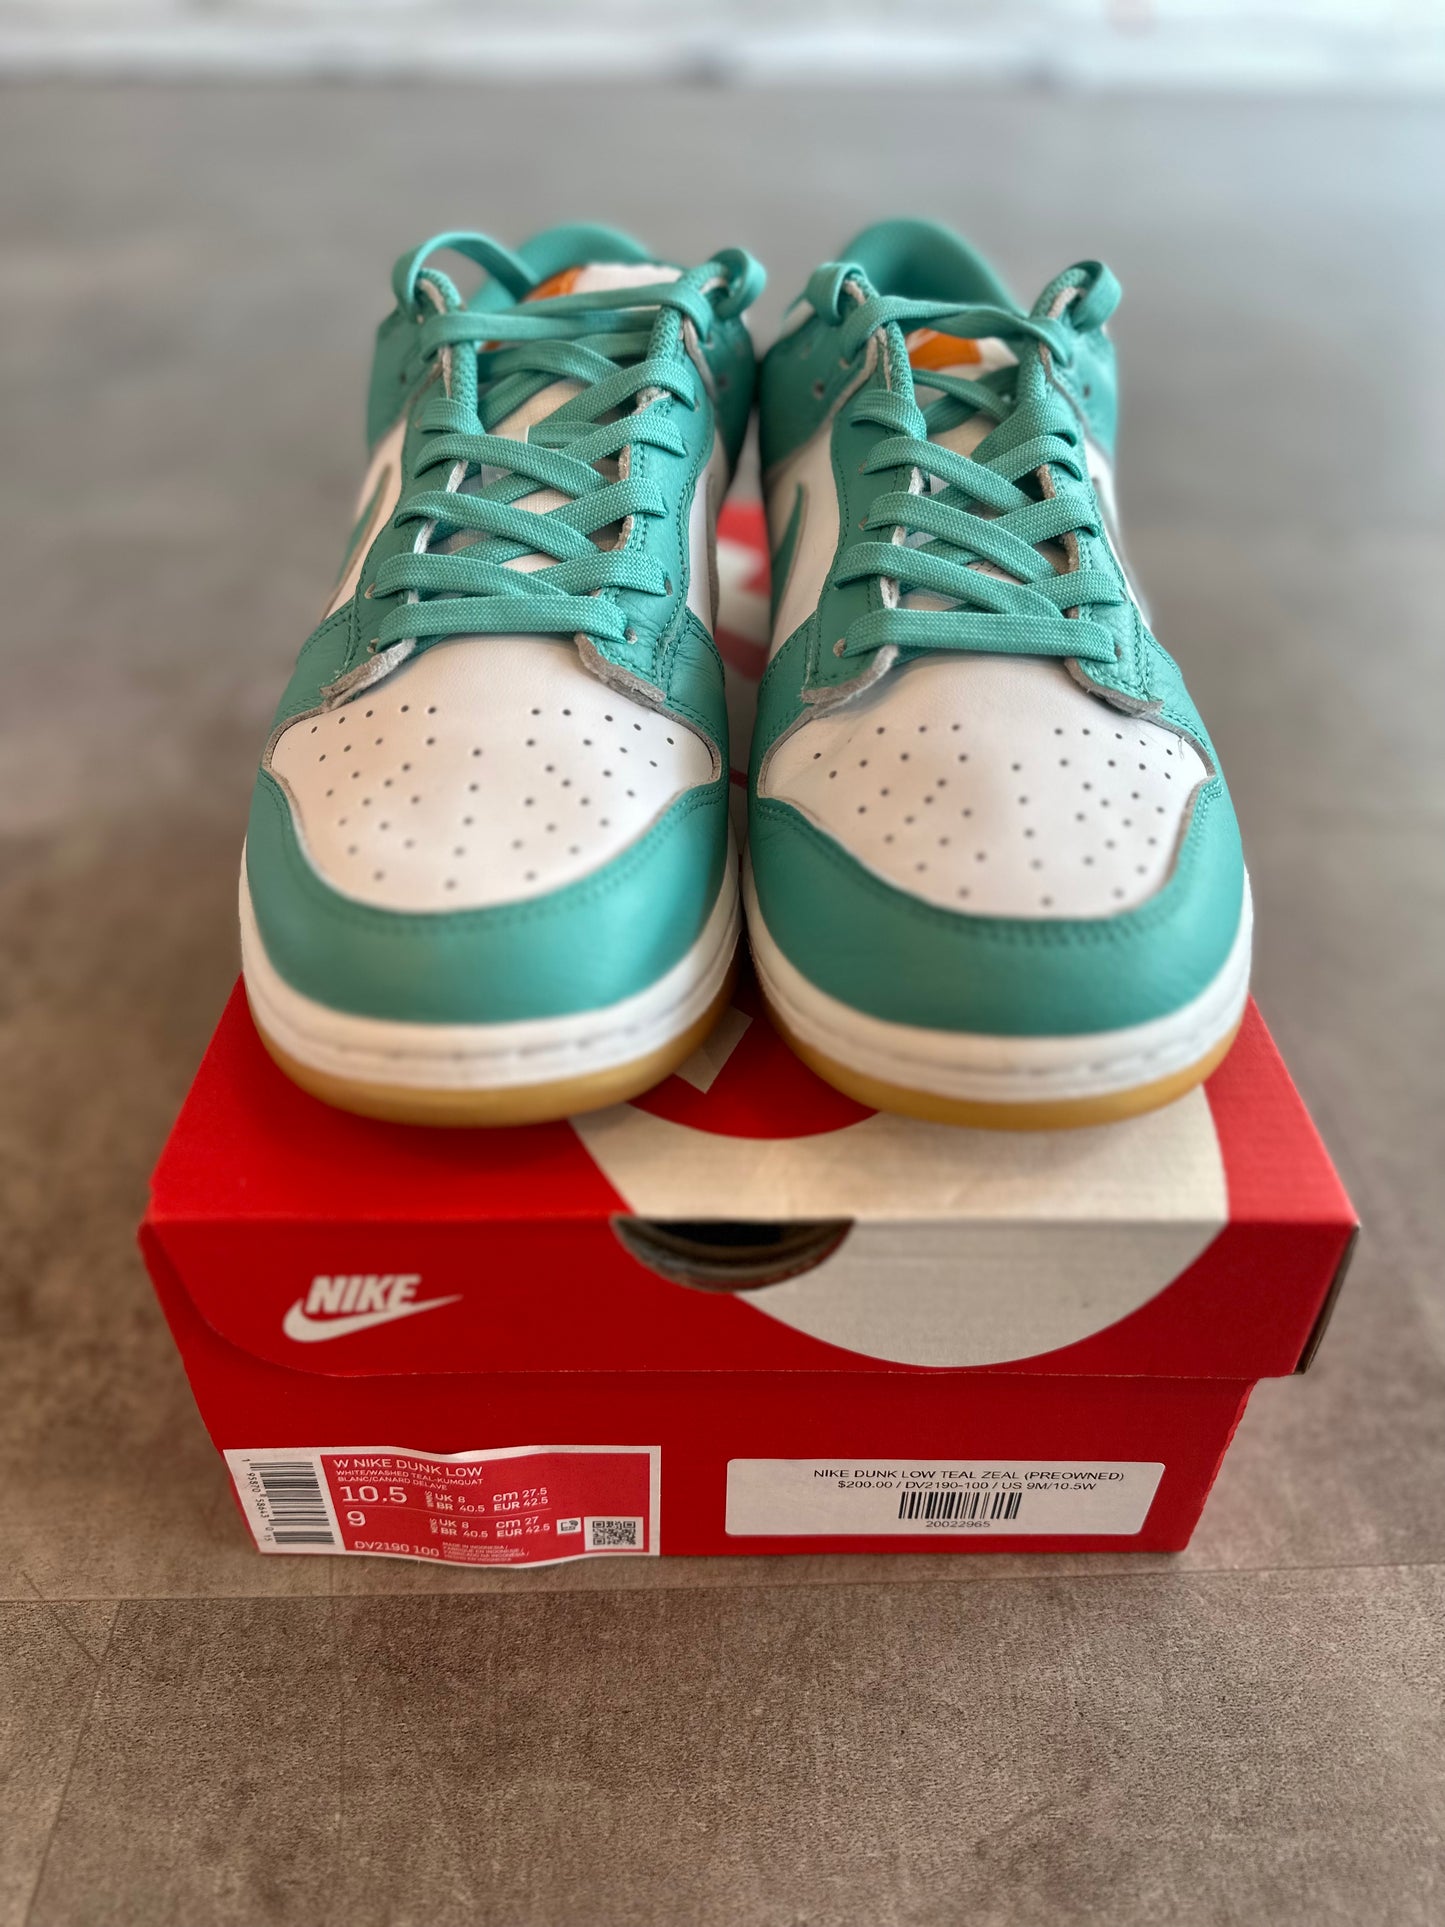 Nike Dunk Low Teal Zeal (Preowned)